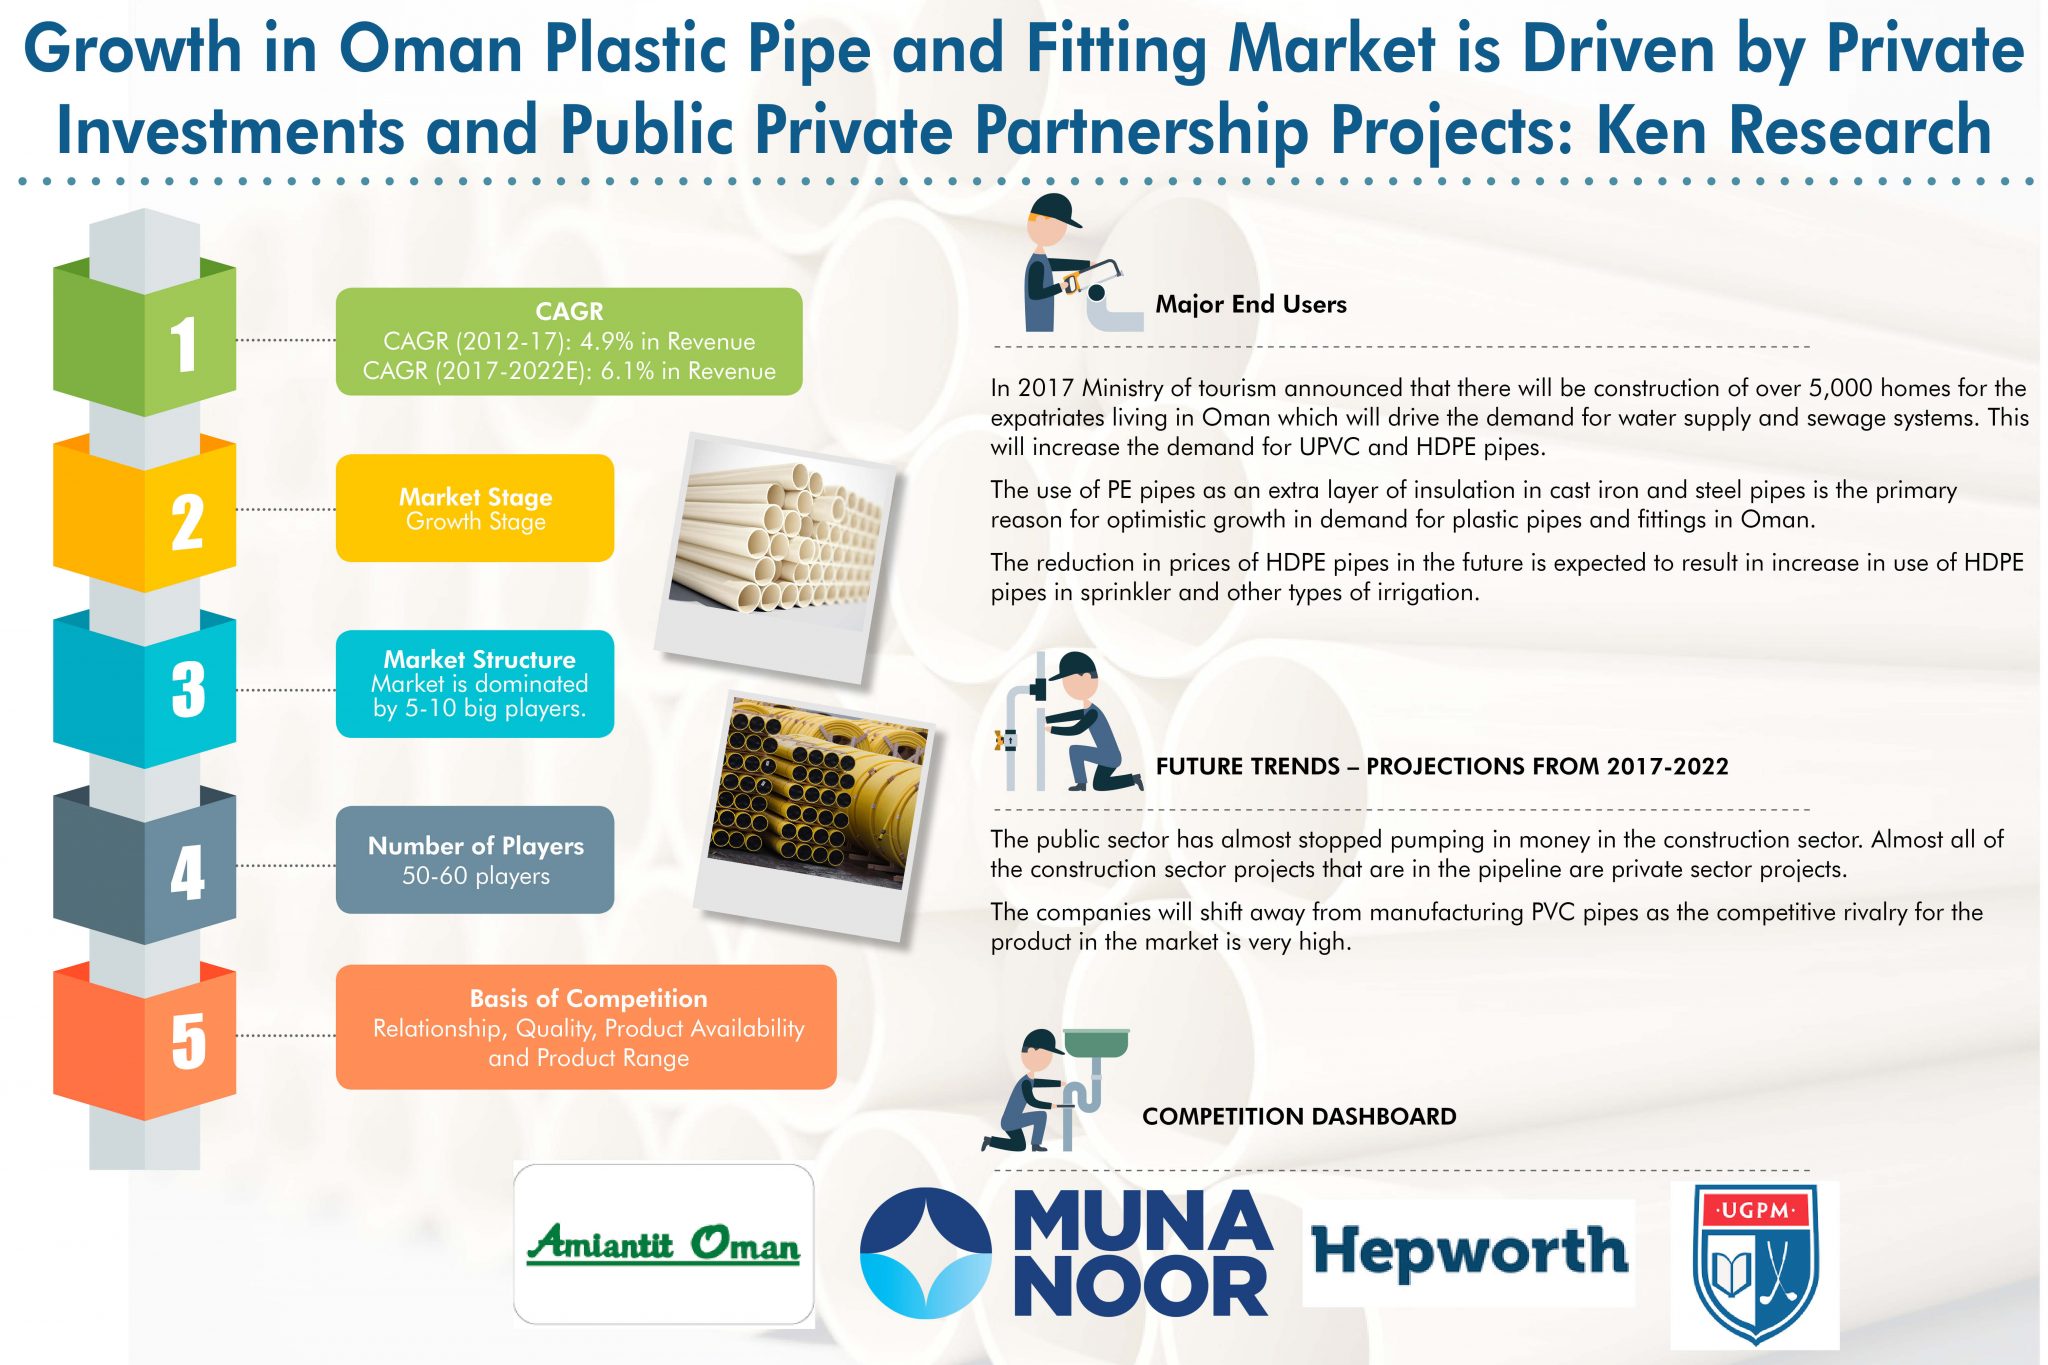 Oman Plastic Pipe and Fitting Market